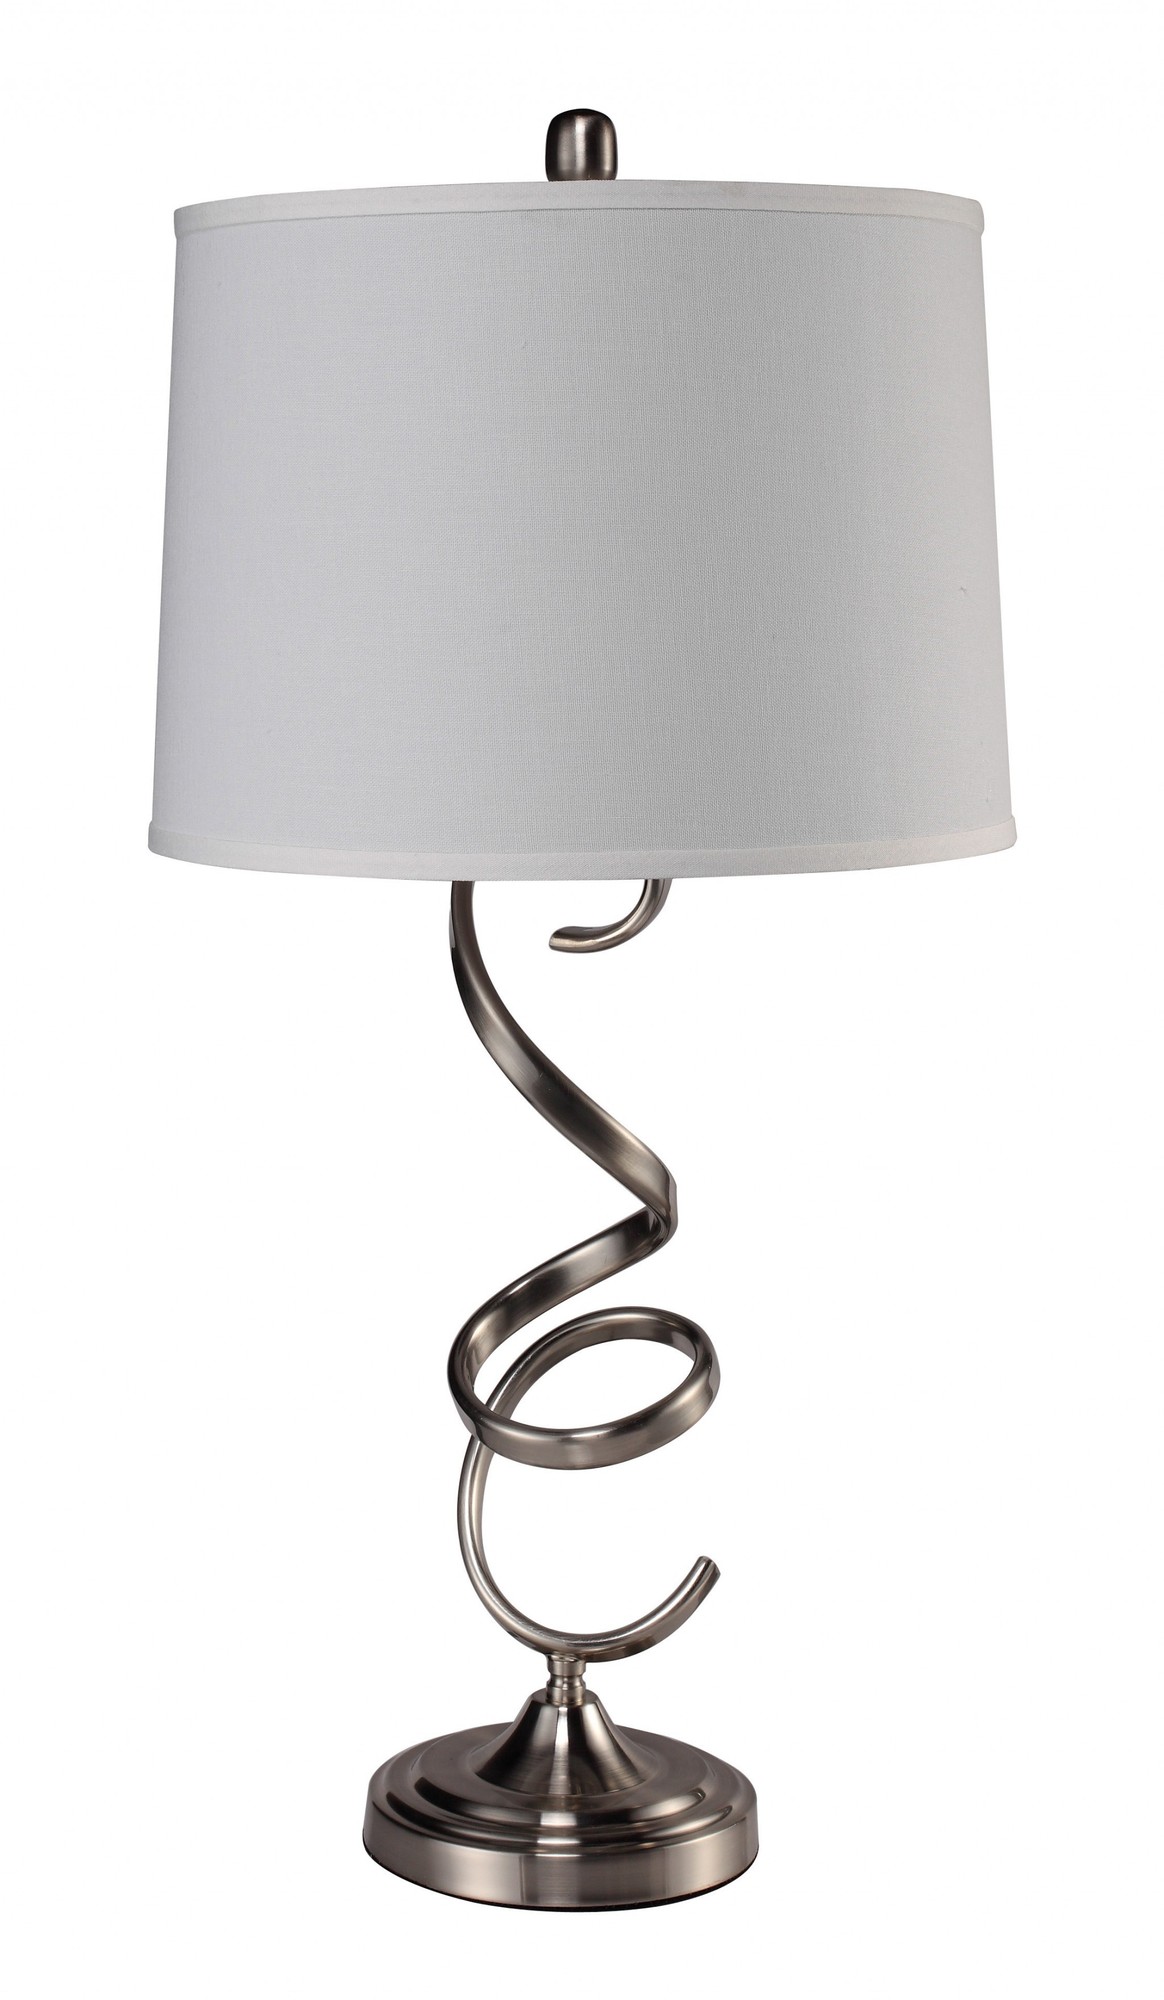 Contemporary Silver Table Lamp with White Shade